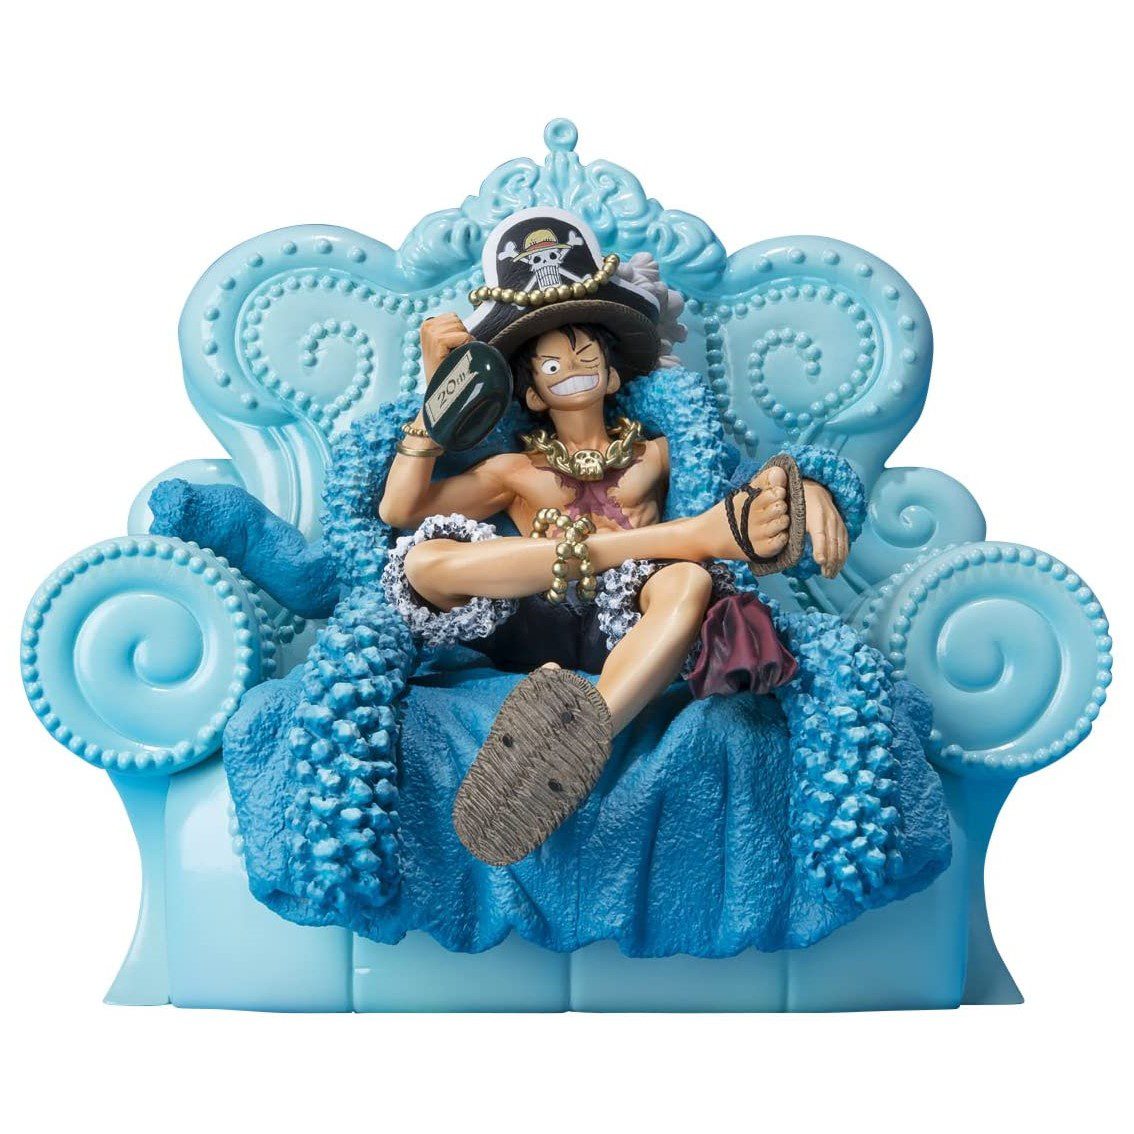 4573102617224-PN-OP617224-Cod.-Articulo-DSP0000005577-Figura-pack-9-unidades-tamashii-nations-one-piece-vol-1-blind-boxes-1